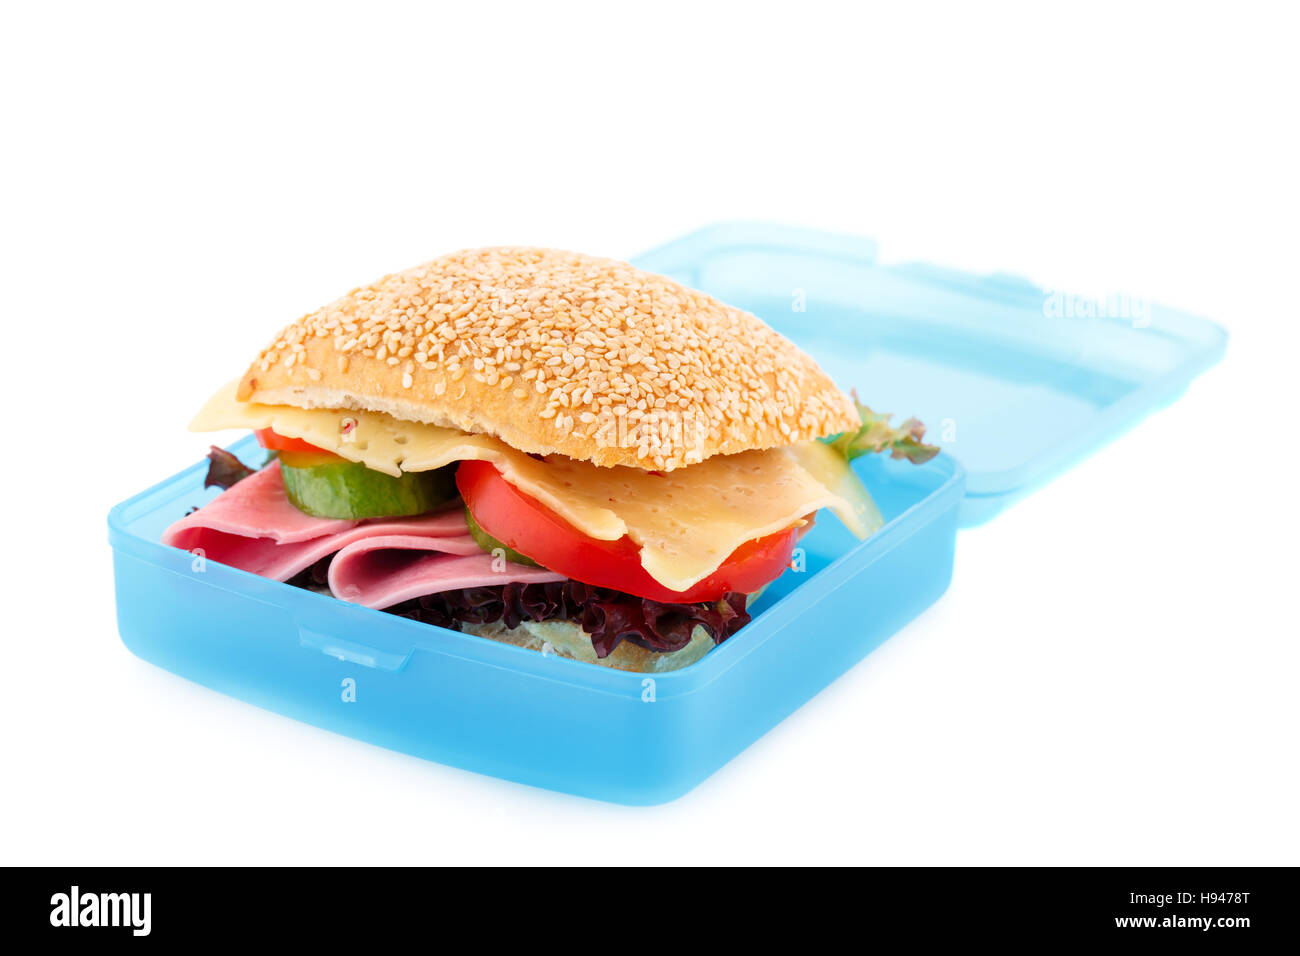 Sandwich with fresh vegetables, ham and cheese in plastic container isolated on white background. Stock Photo